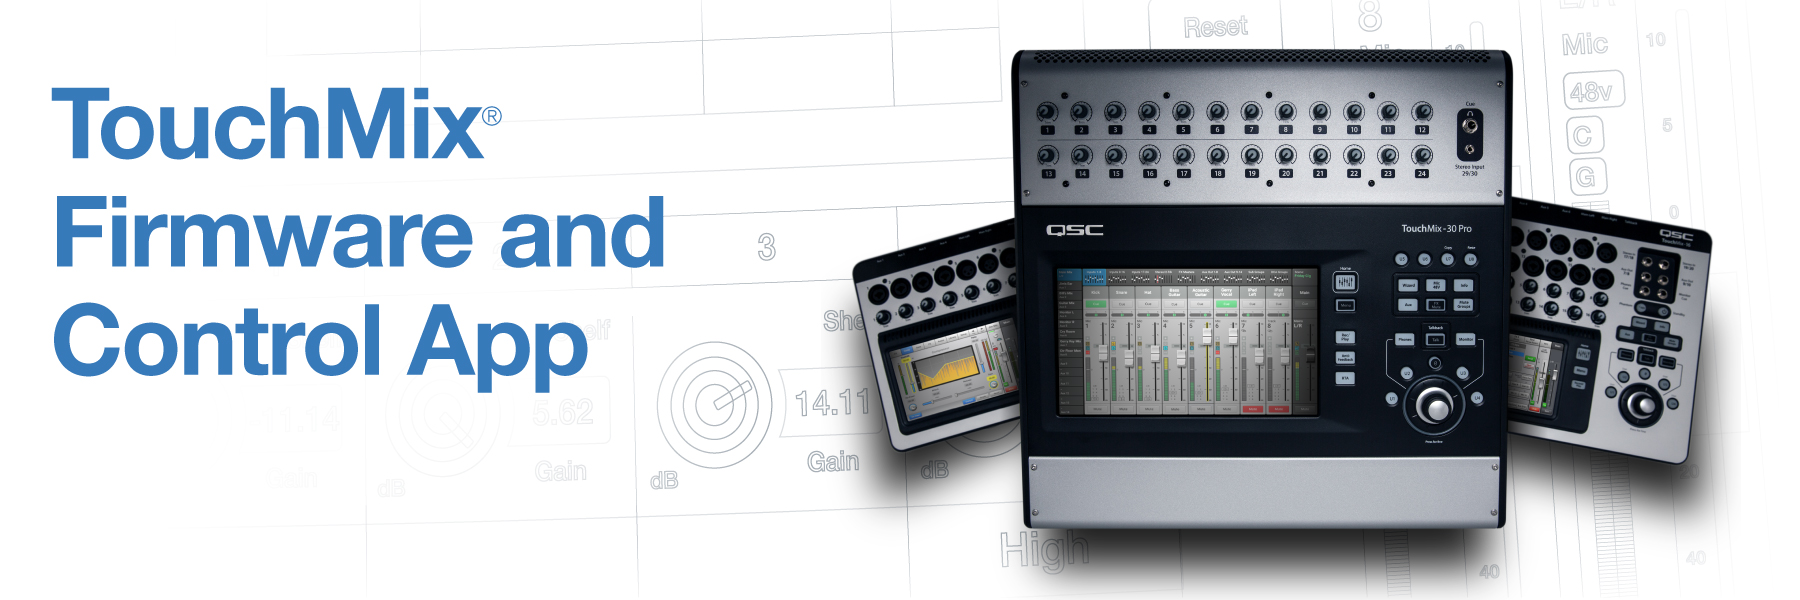 Image of TouchMix Digital Mixers, Image text: TouchMix Firmware and Control App